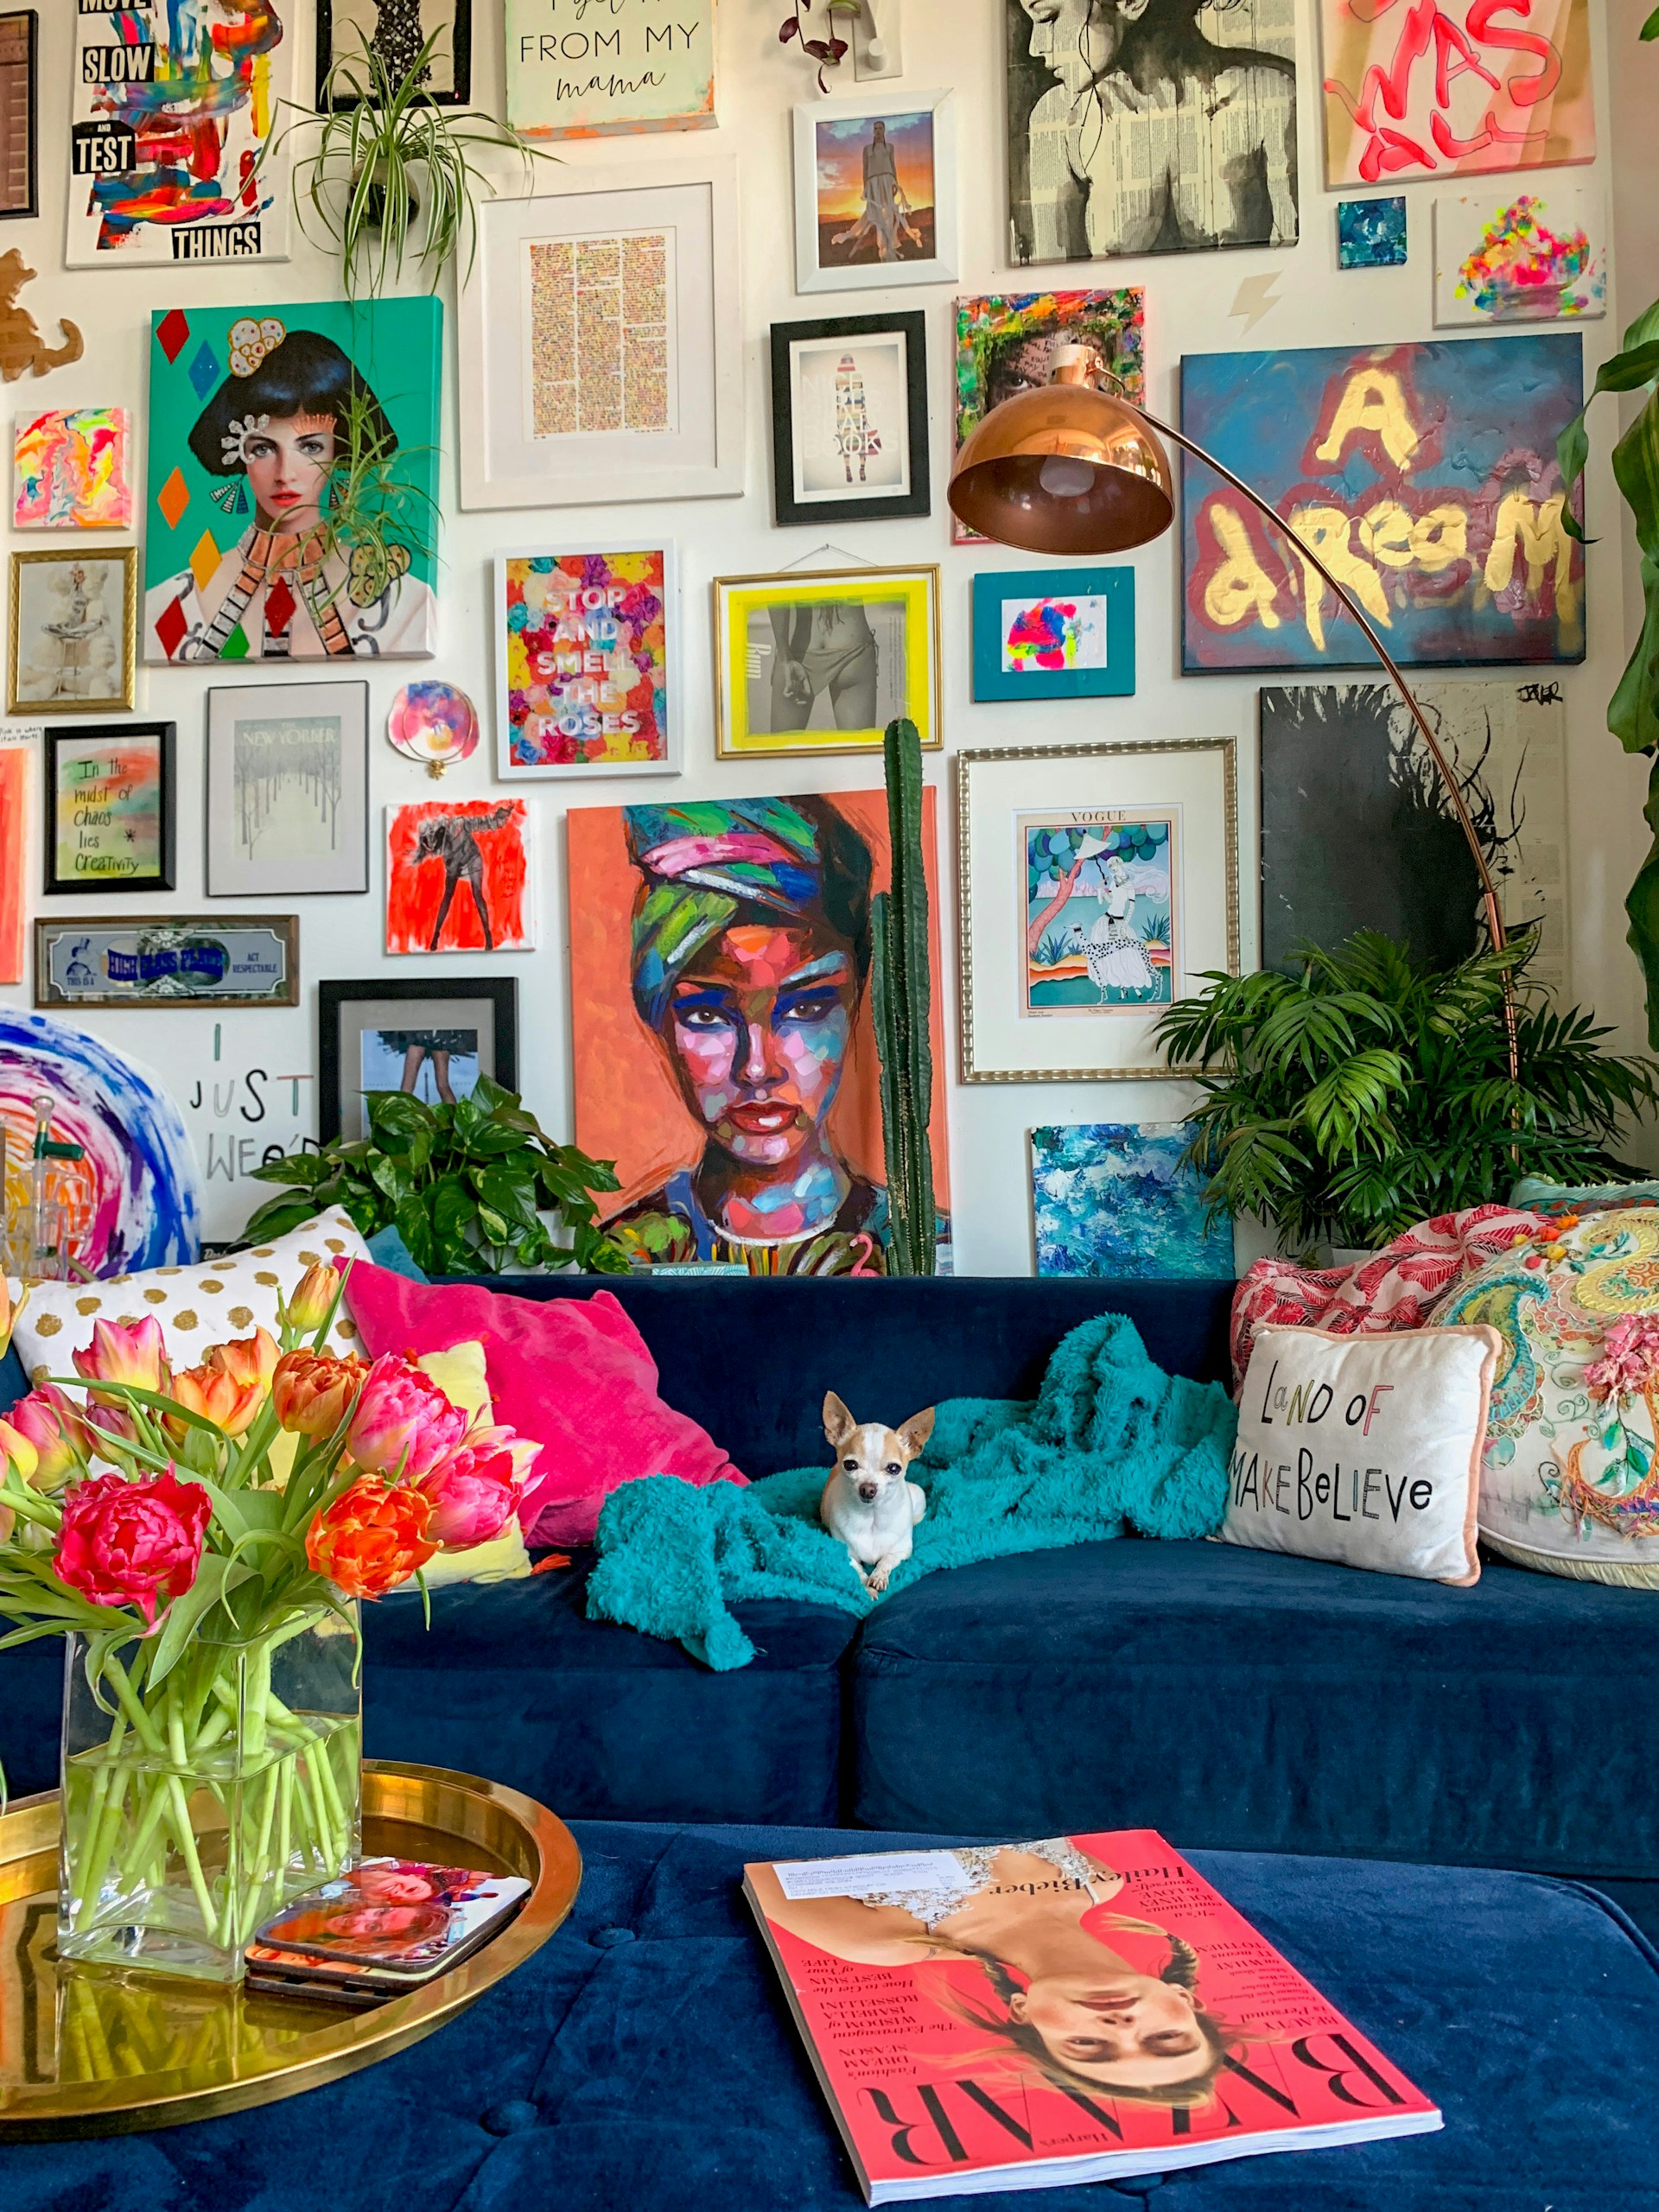 Tiny chihuahua on blue velvet couch in front of a colorful maximalist gallery wall in a Denver apartment home with lots of plants and flowers. Photo by Steph Wilson on Unsplash